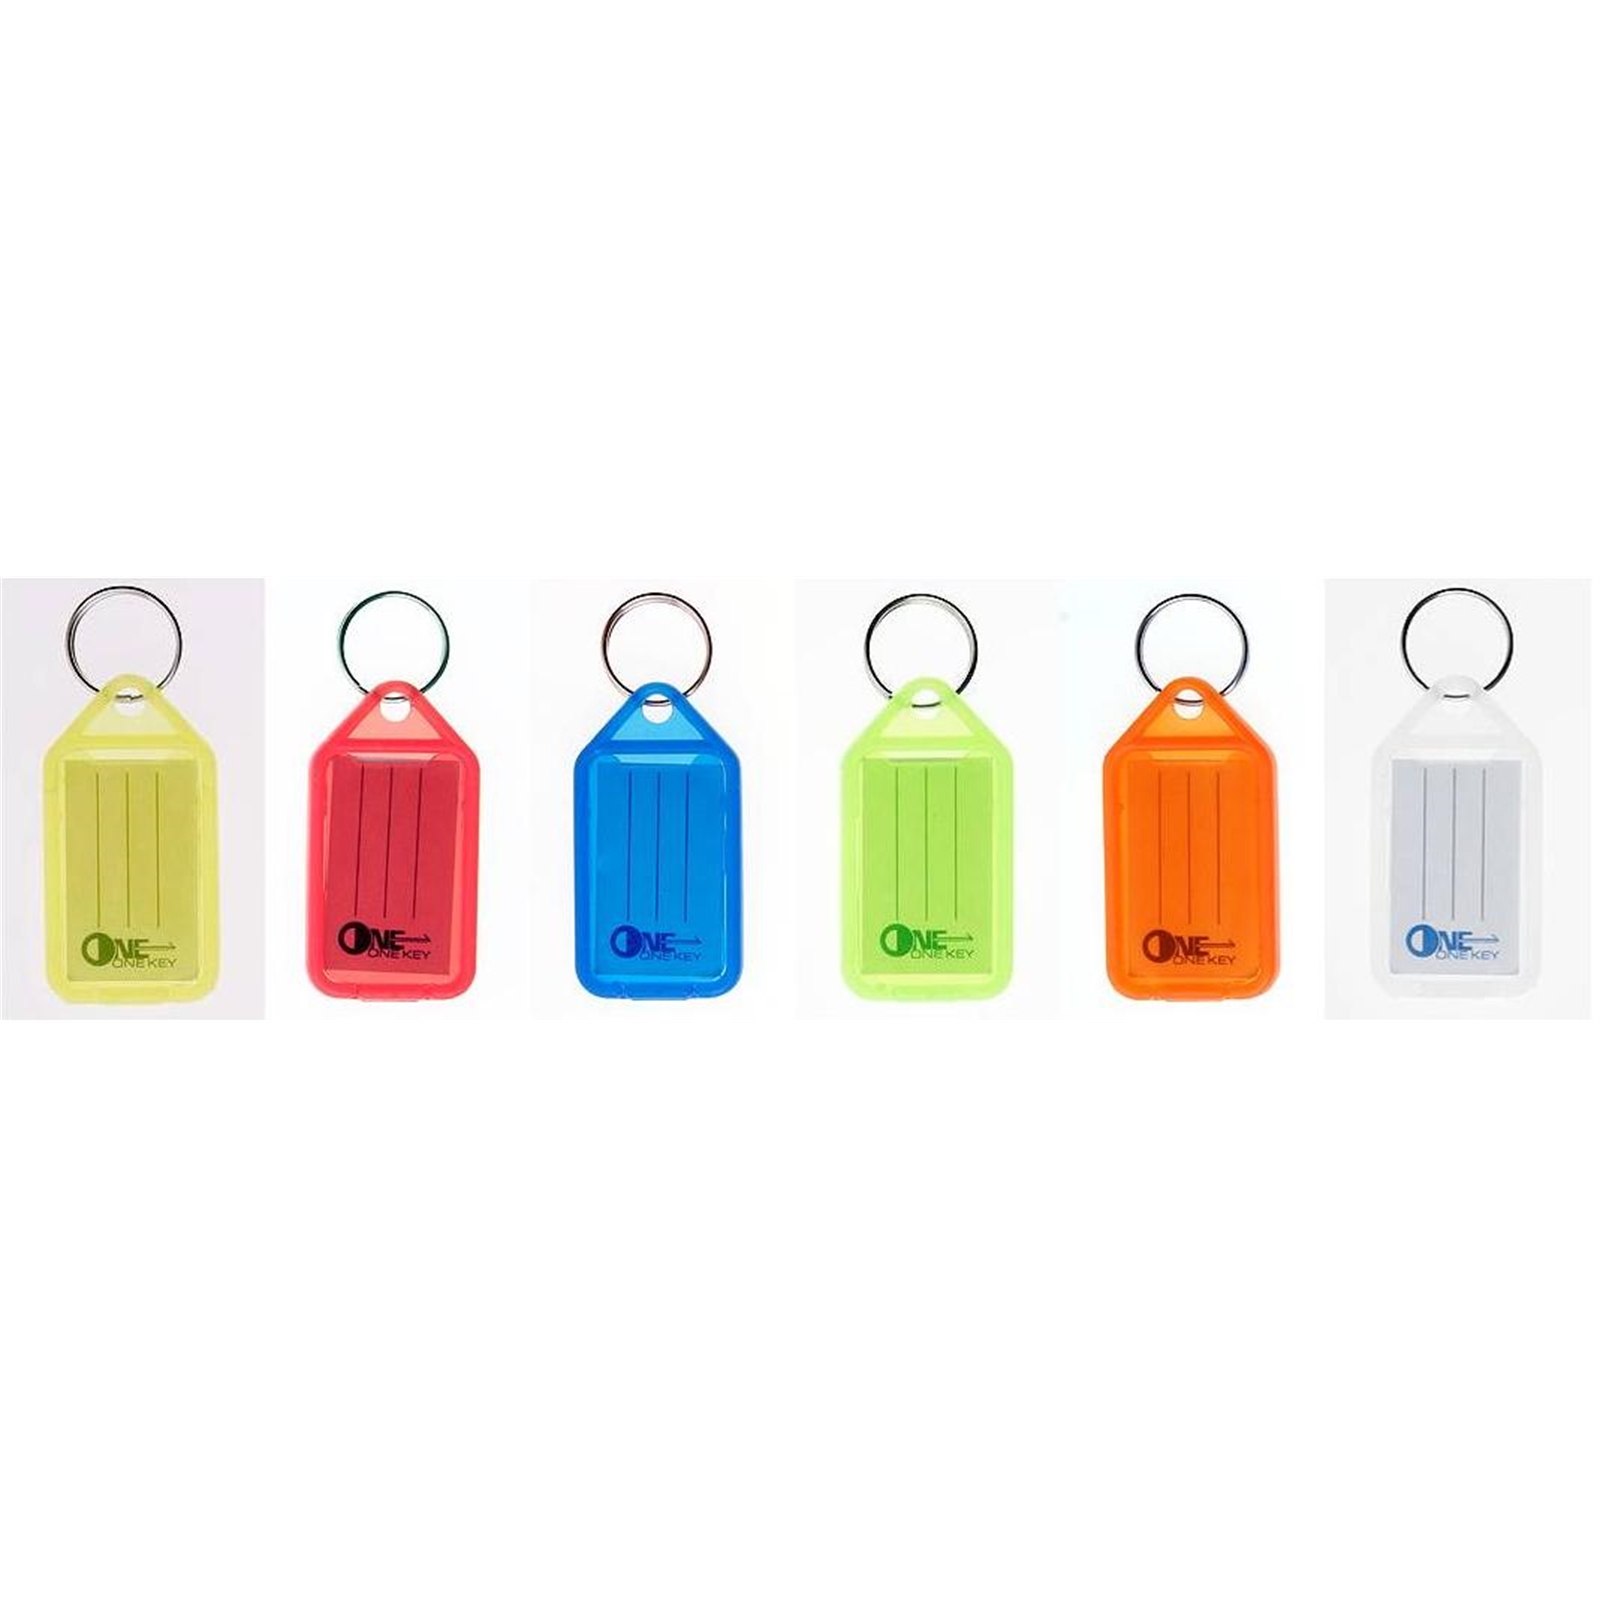 TIC Assorted Colours Key Tag